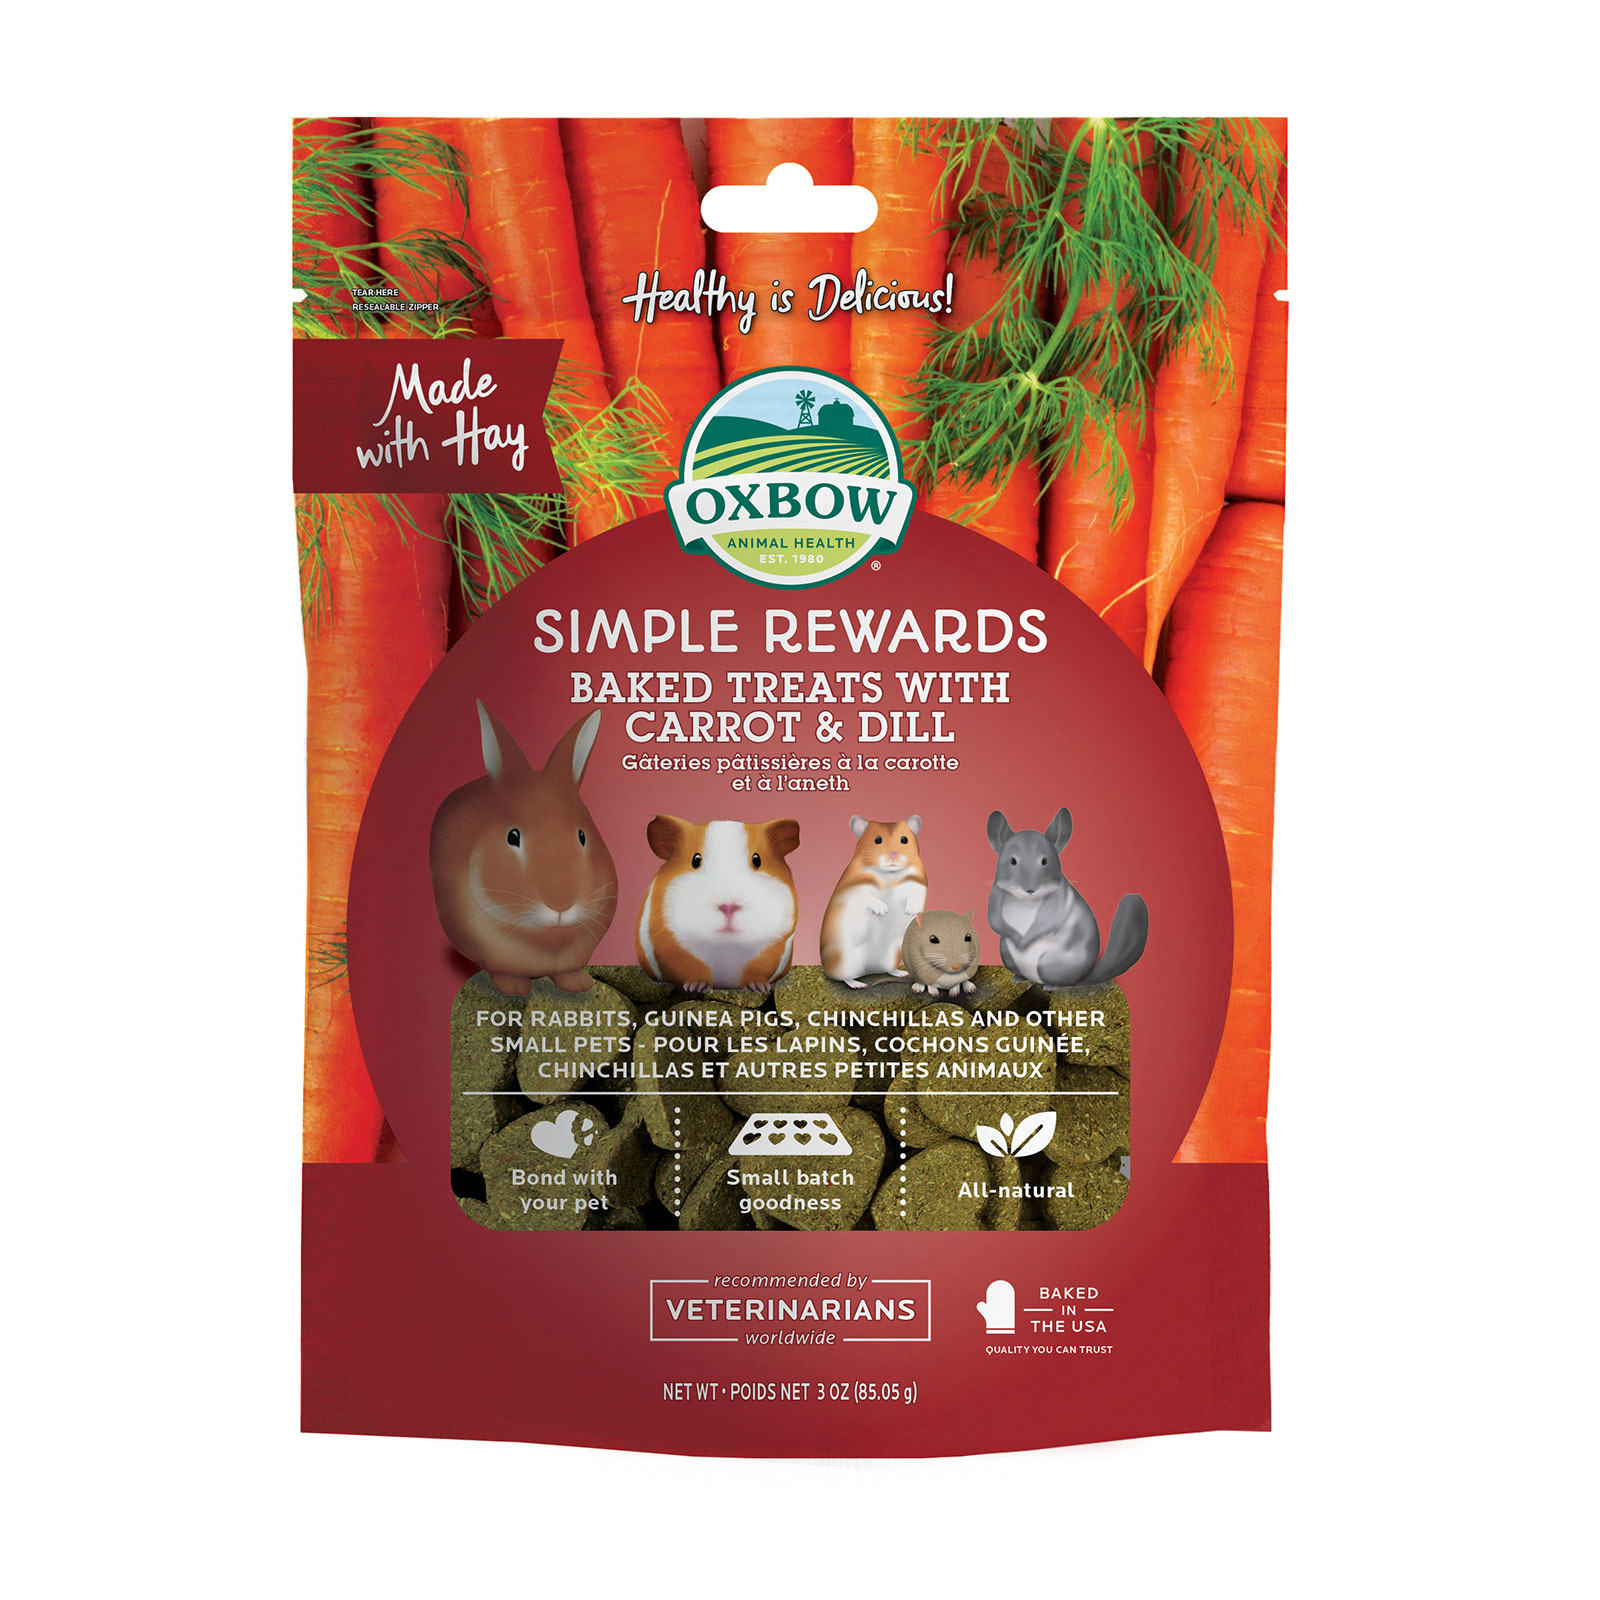 Oxbow Simple Rewards Baked Treats with Carrot & Dill for Small Animals